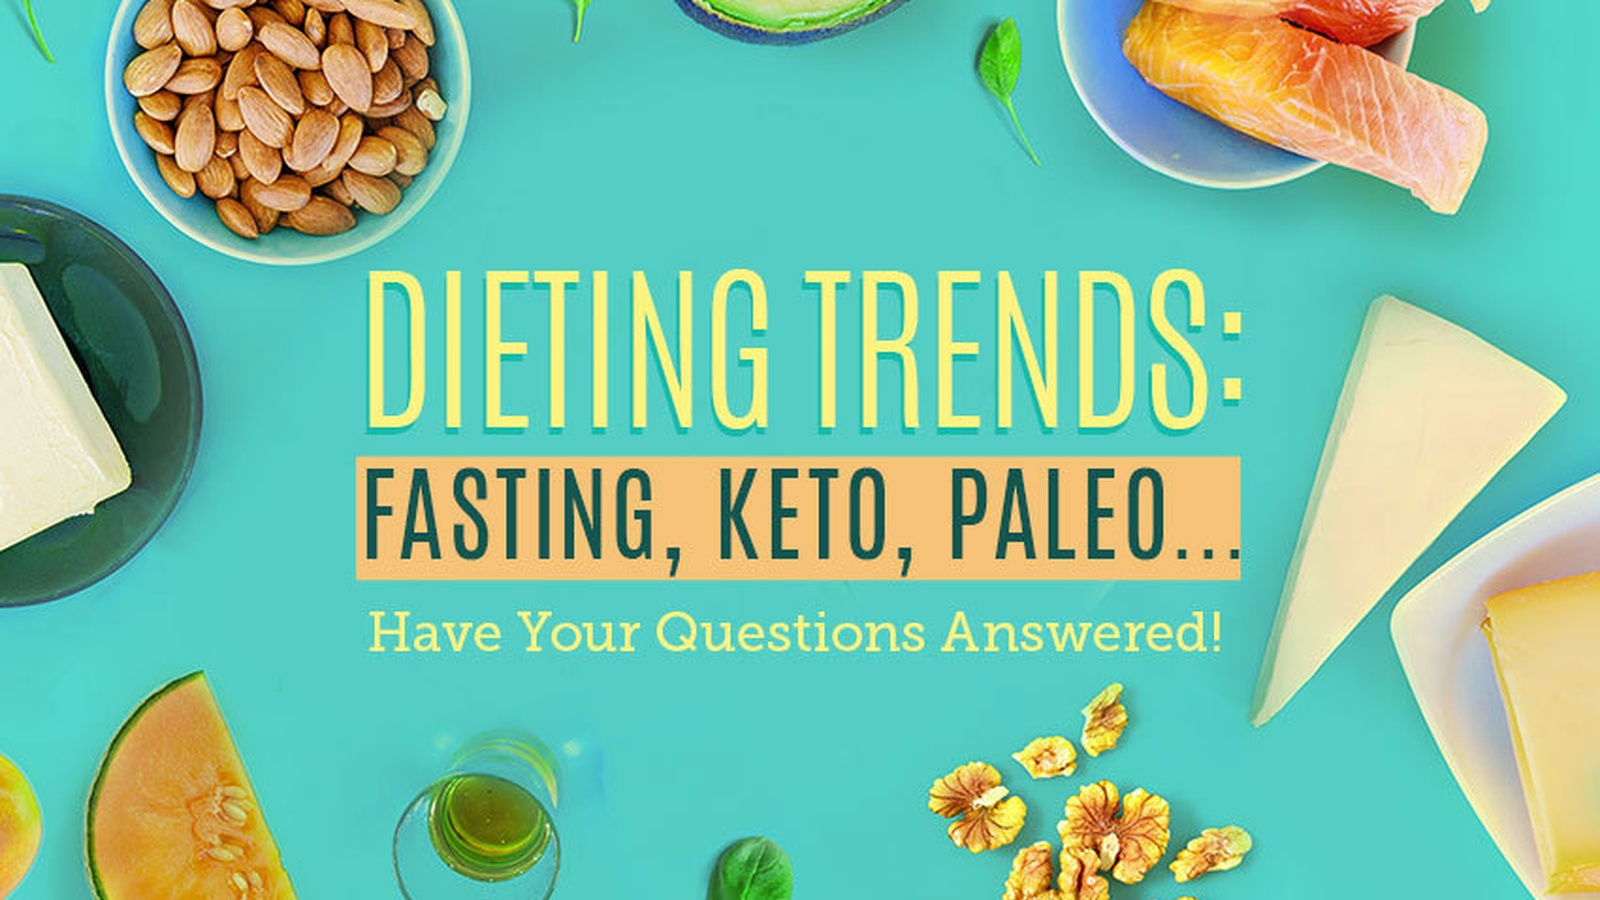 Dieting Trends: Fasting, Keto, Paleo... Have Your Questions Answered!